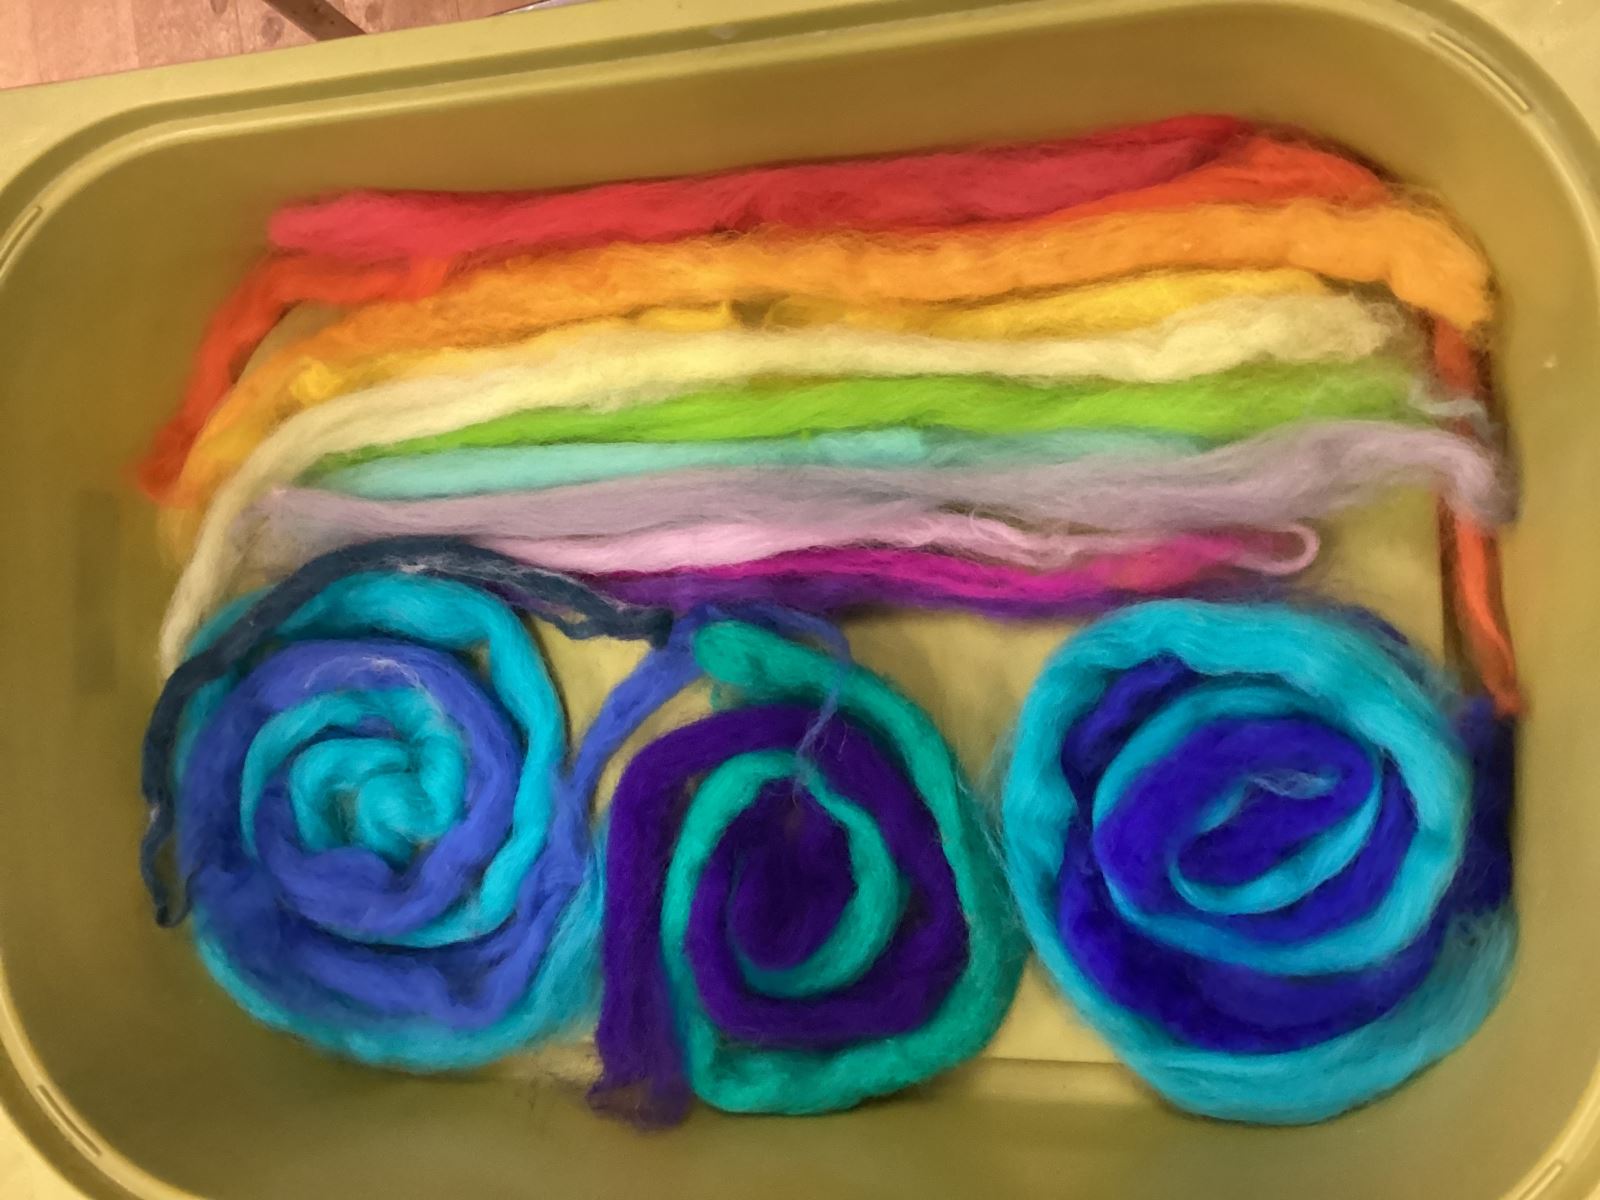 Felt in a tub that looks like a rainbow on the left and blue and purple swirls on the right